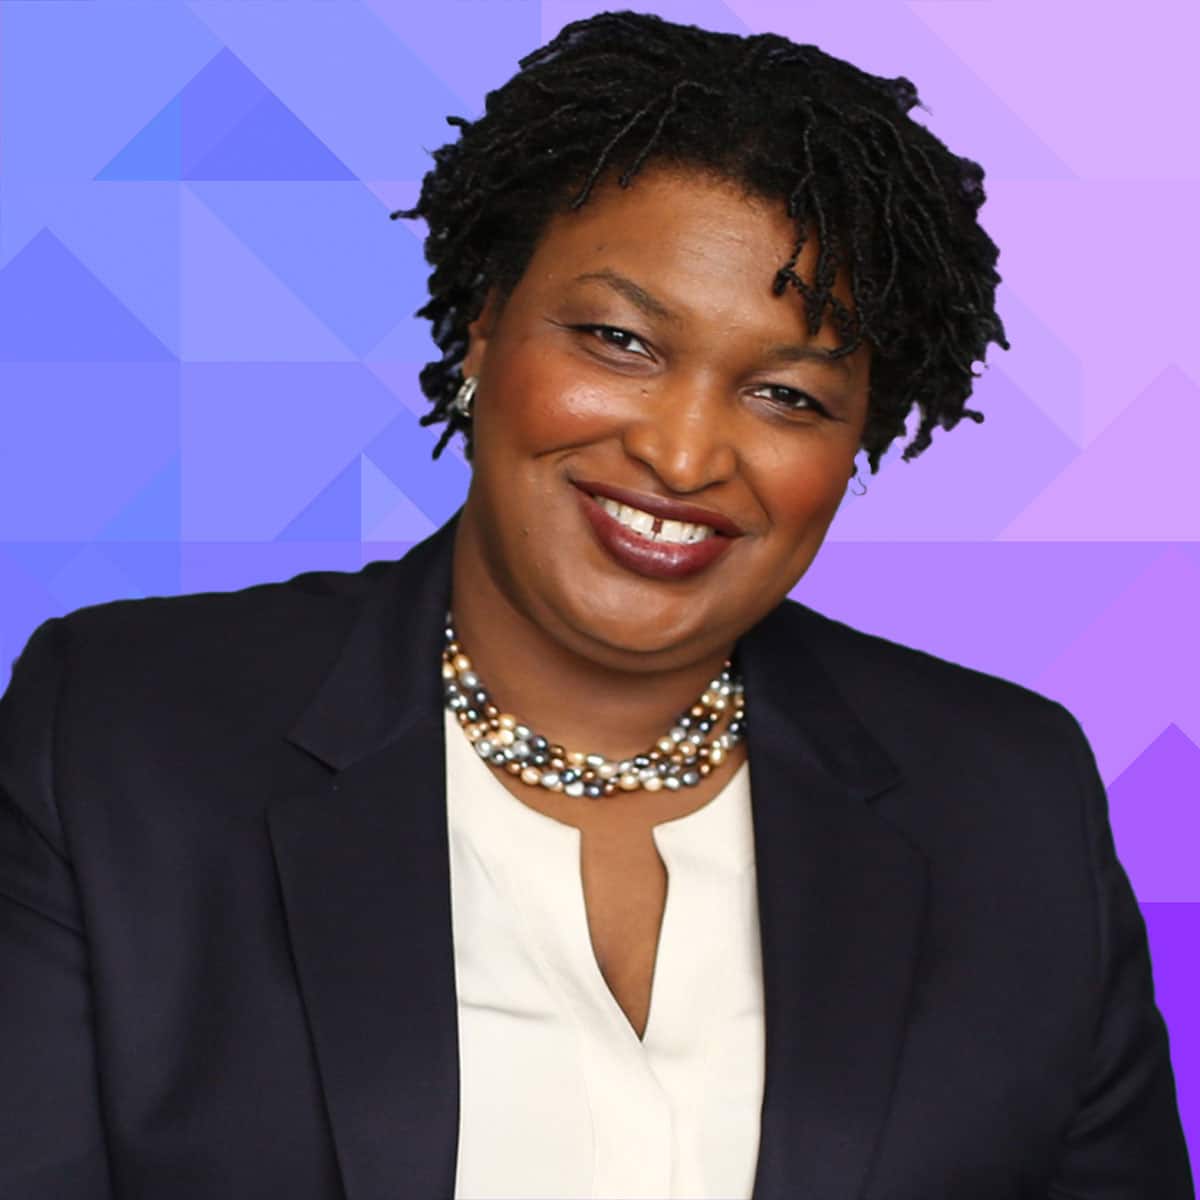 Stacey Abrams Has Some Thoughts On The Abortion Bans In Alabama And Georgia